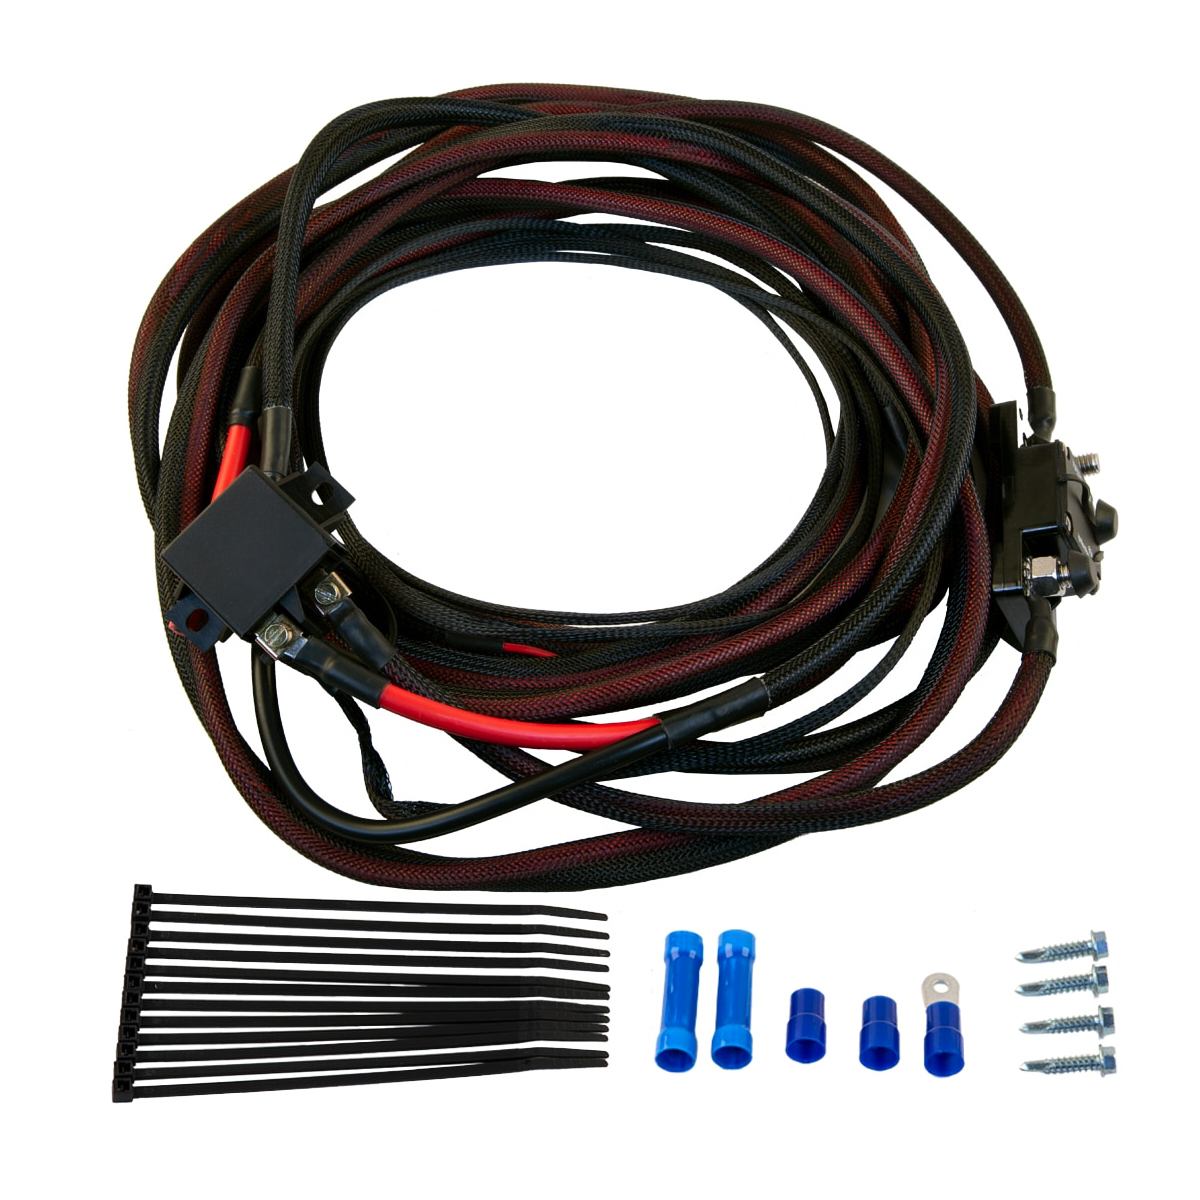 Aeromotive 16308 Fuel Pump Wiring Harness, 60 amp, Cable Ties / Connectors / Relay / Wire, Kit